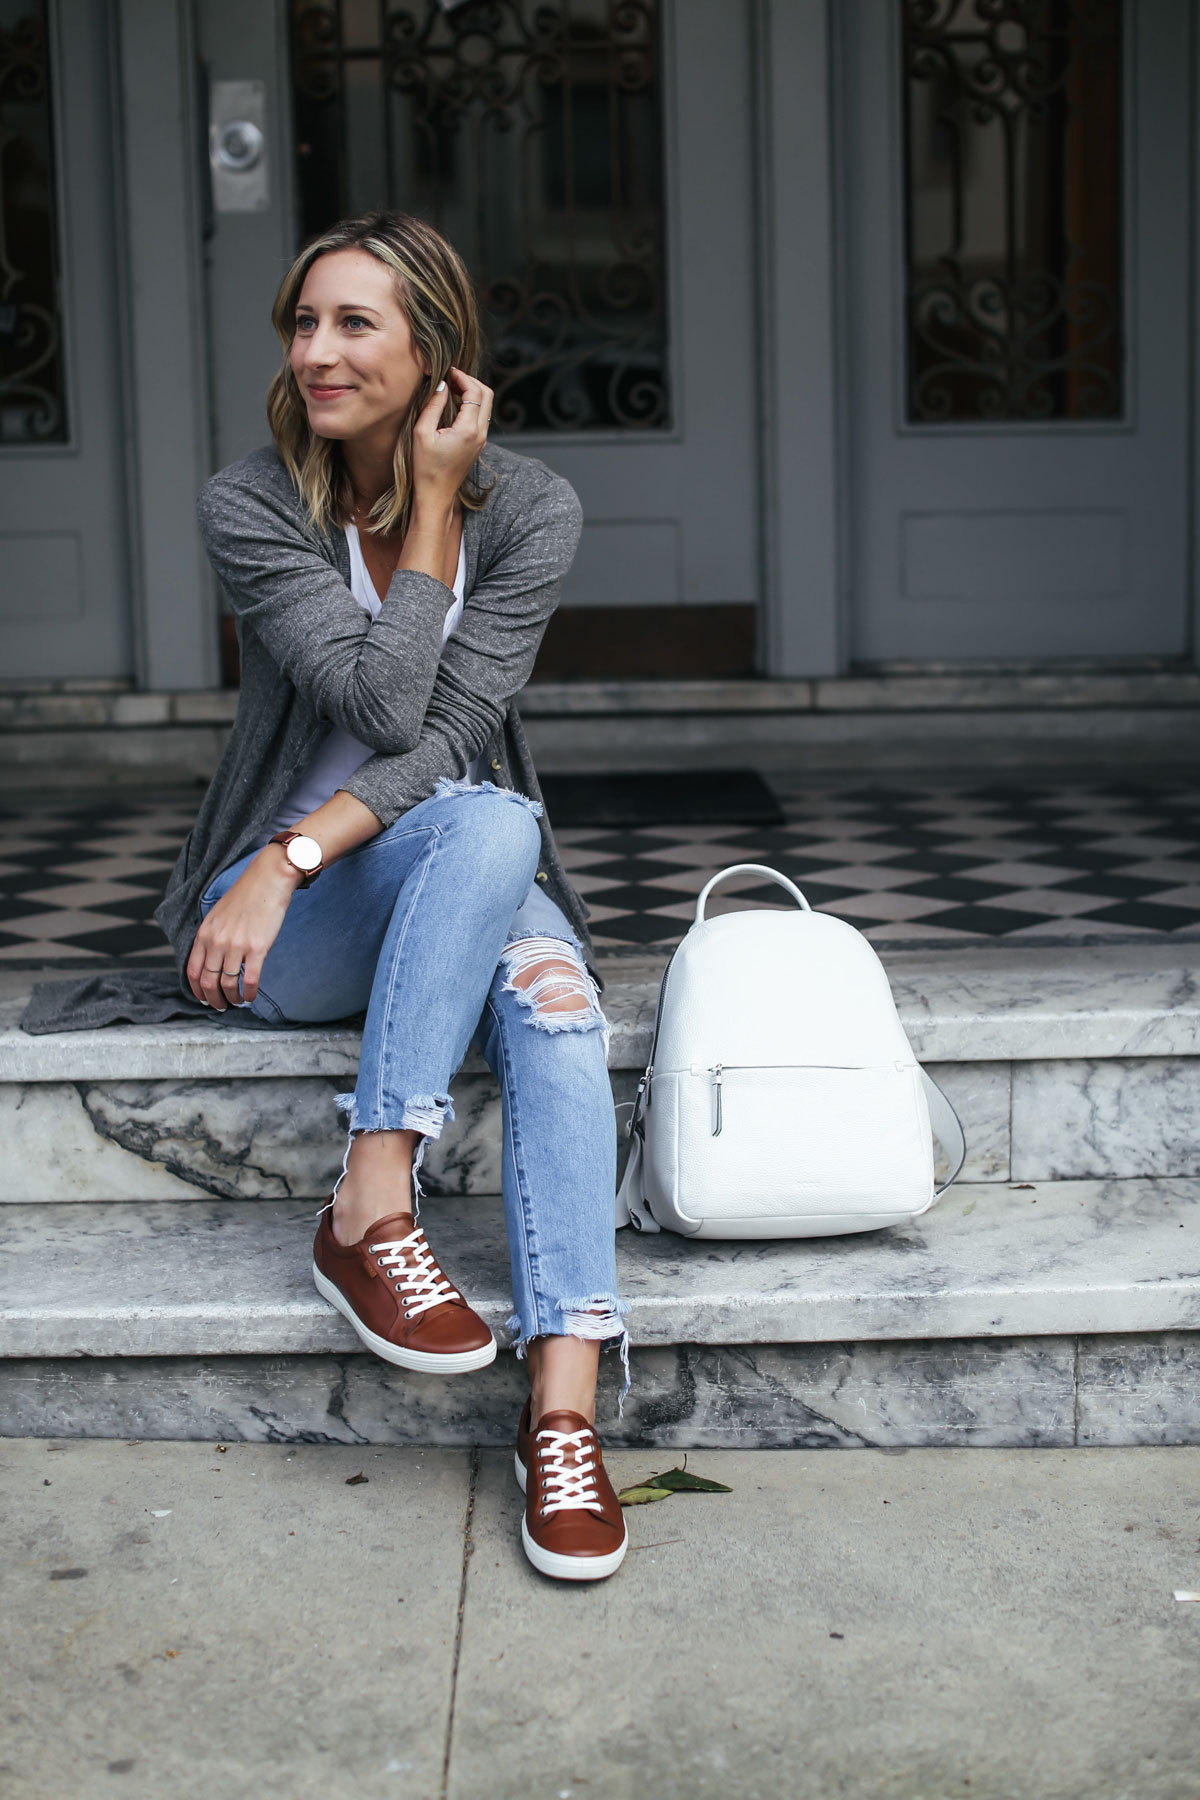 travel outfit with distressed boyfriend jeans, white leather backpack, brown leather sneakers, and gray cardigan